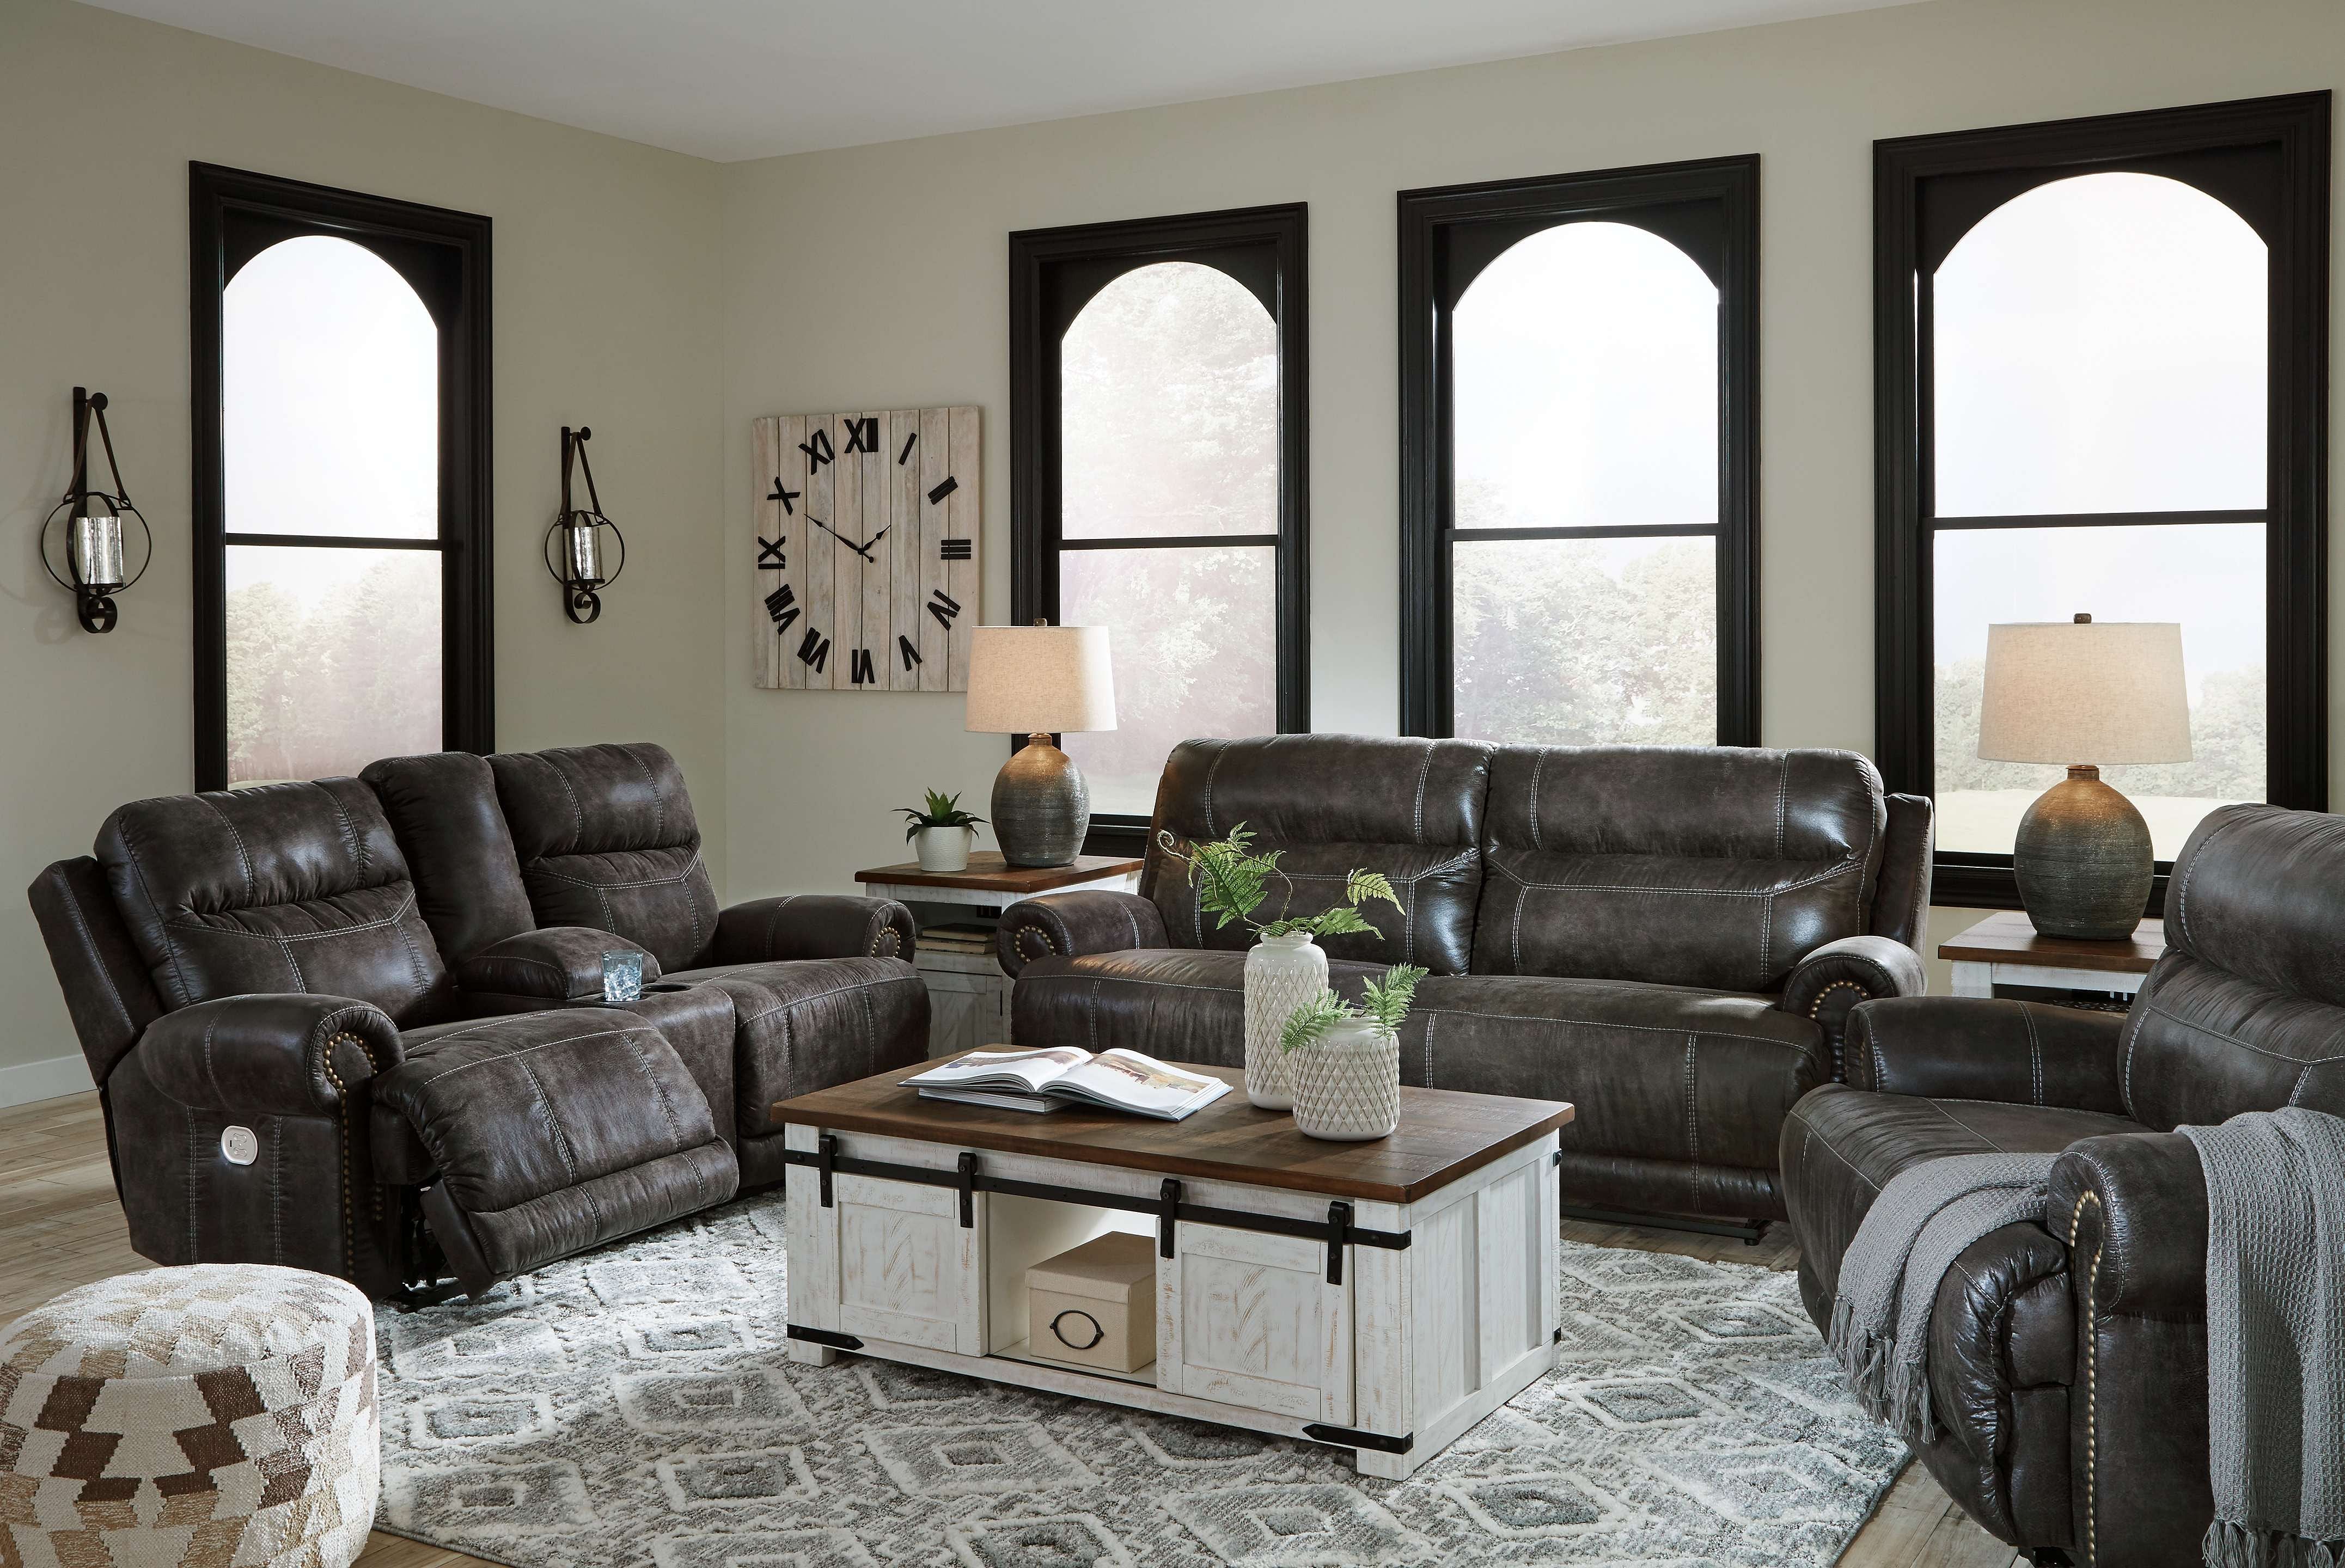 Ashley Furniture 65005 47 18 82 Grearview Charcoal 3 Piece 2 Seat Sofa With Loveseat Wide Seat 1 